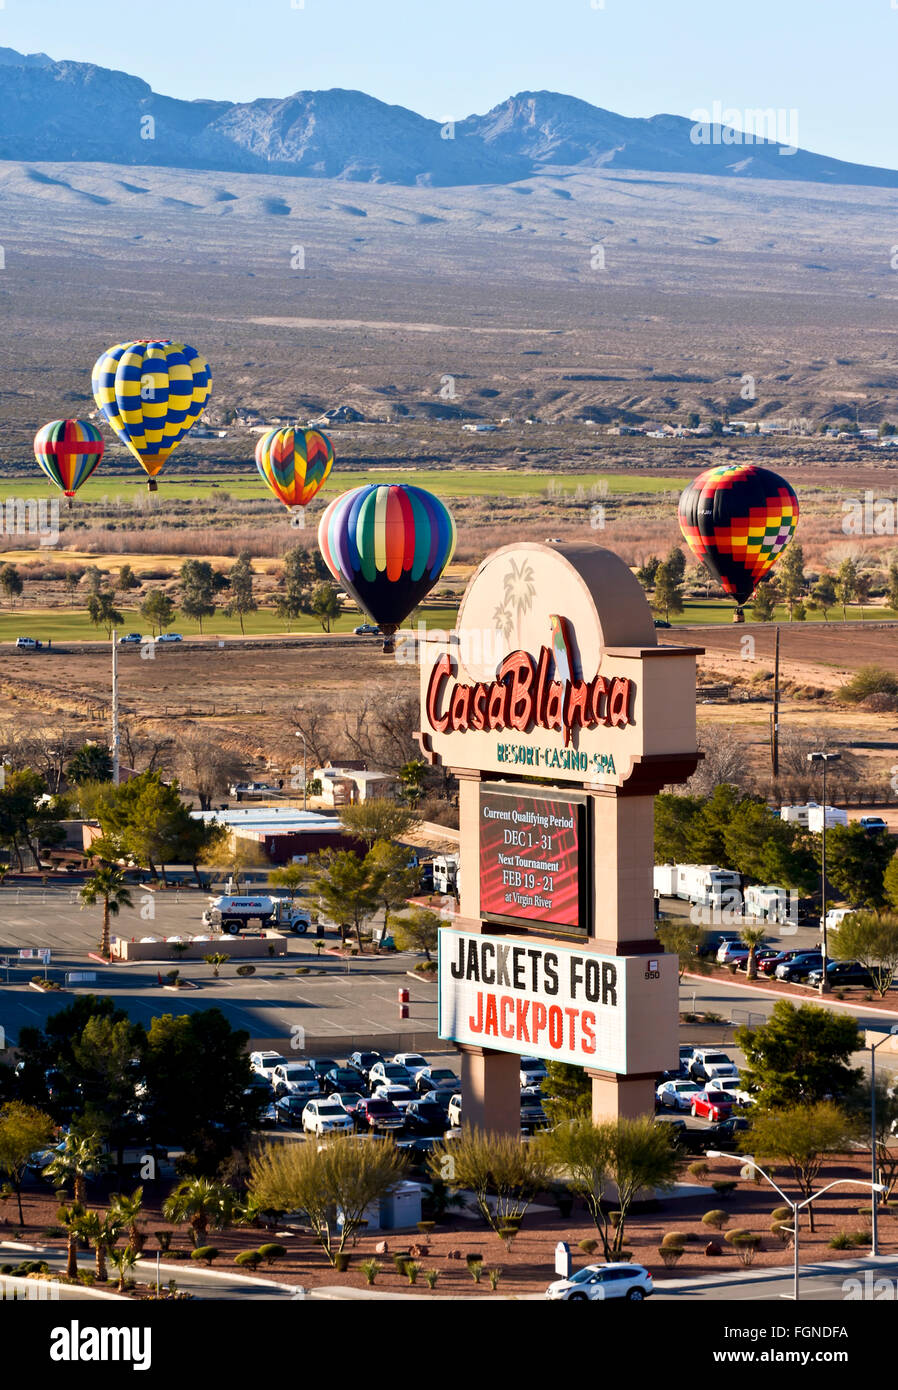 The Casablanca Resort Casino Hotel hosted the 2016 Mesquite Hot Air Balloon Festival in Mesquite Nevada Stock Photo